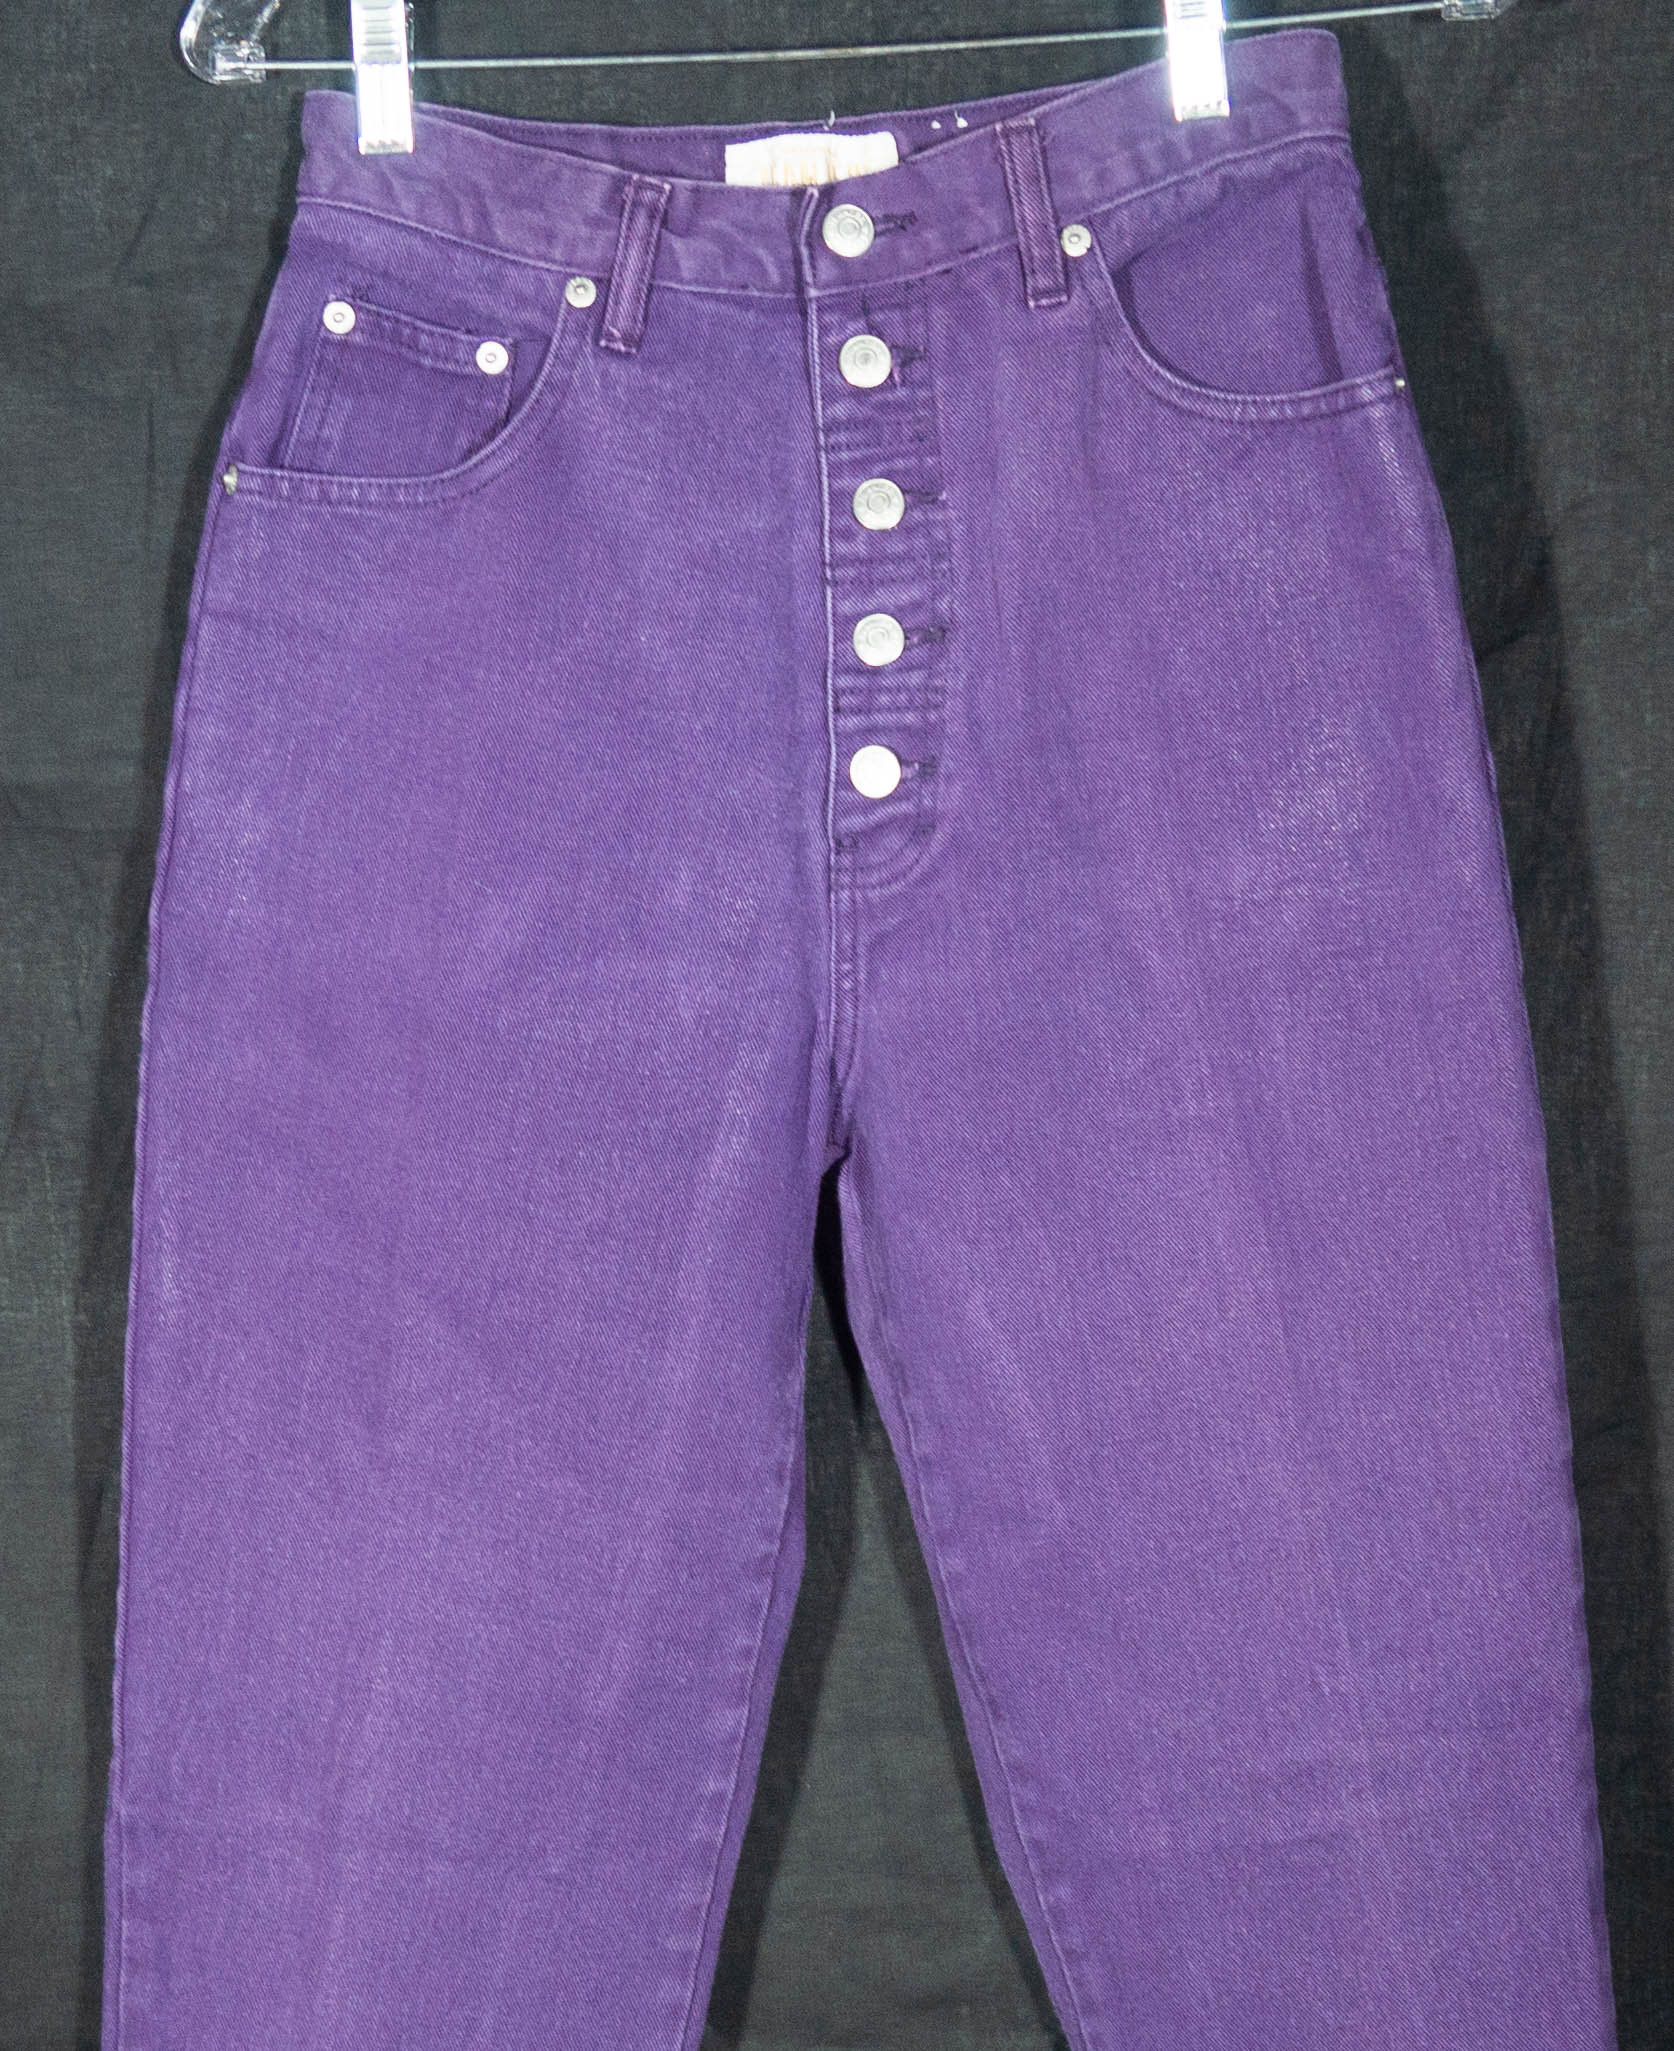 purple brand, Jeans, They Are New With Tags And Price Tag Also Never Been  Worn Or Tried On